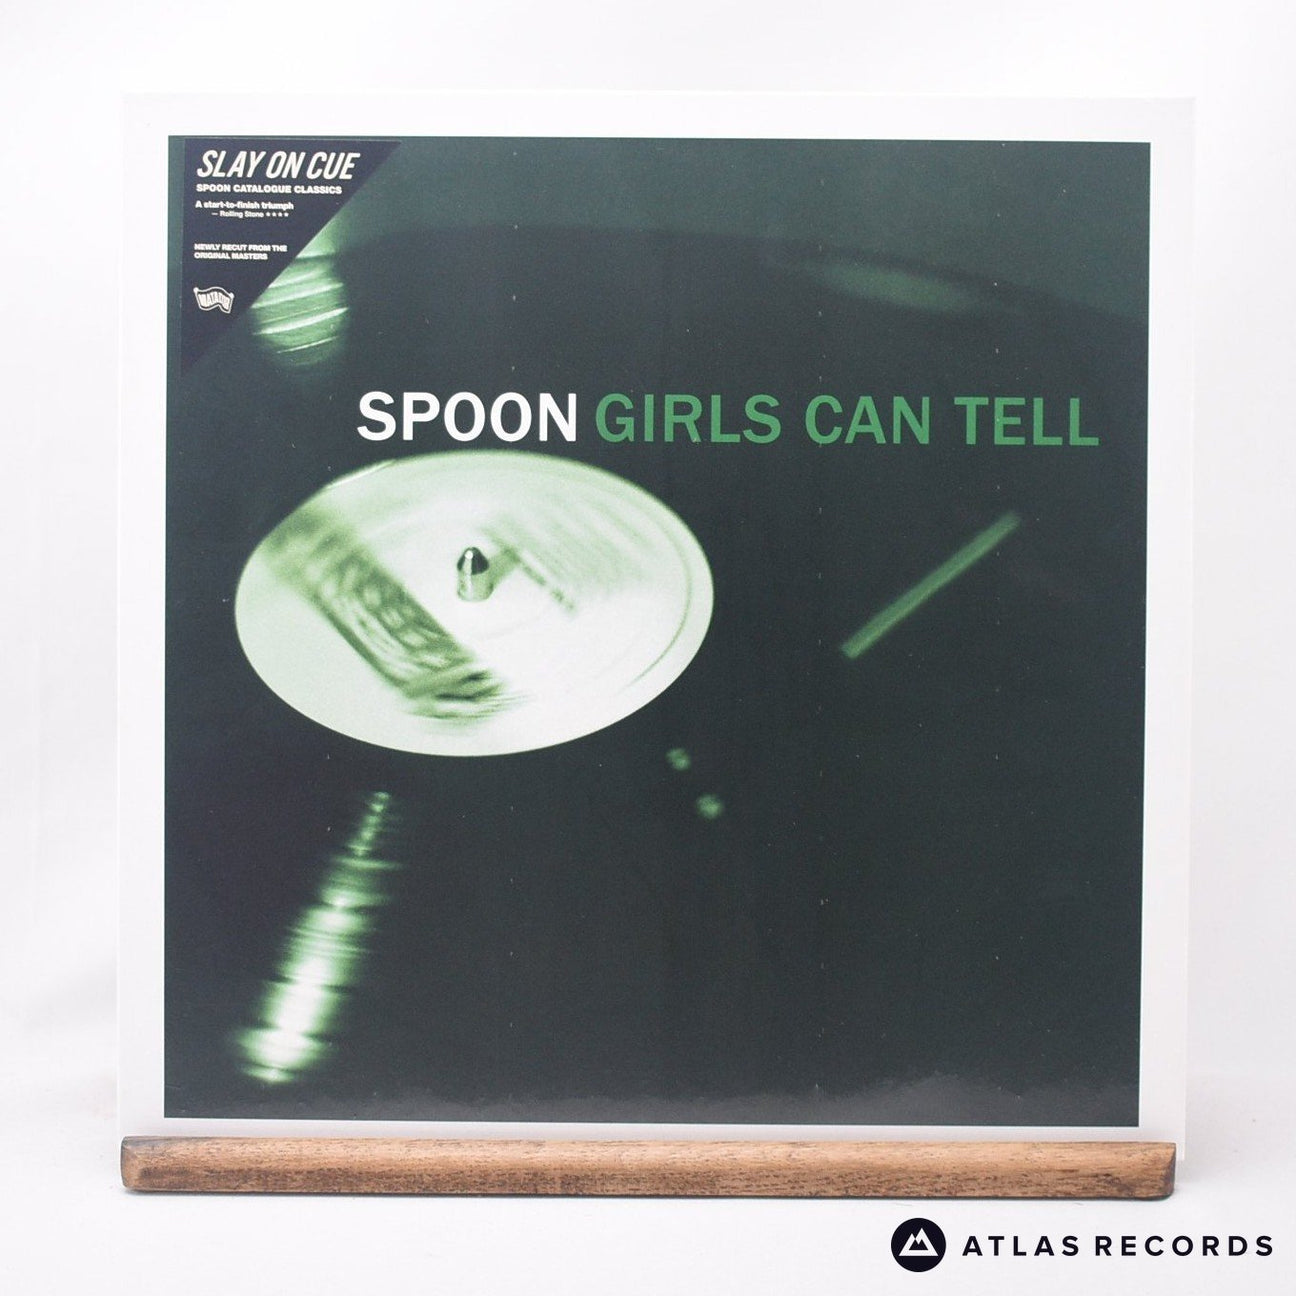 Spoon Girls Can Tell LP Vinyl Record - Front Cover & Record